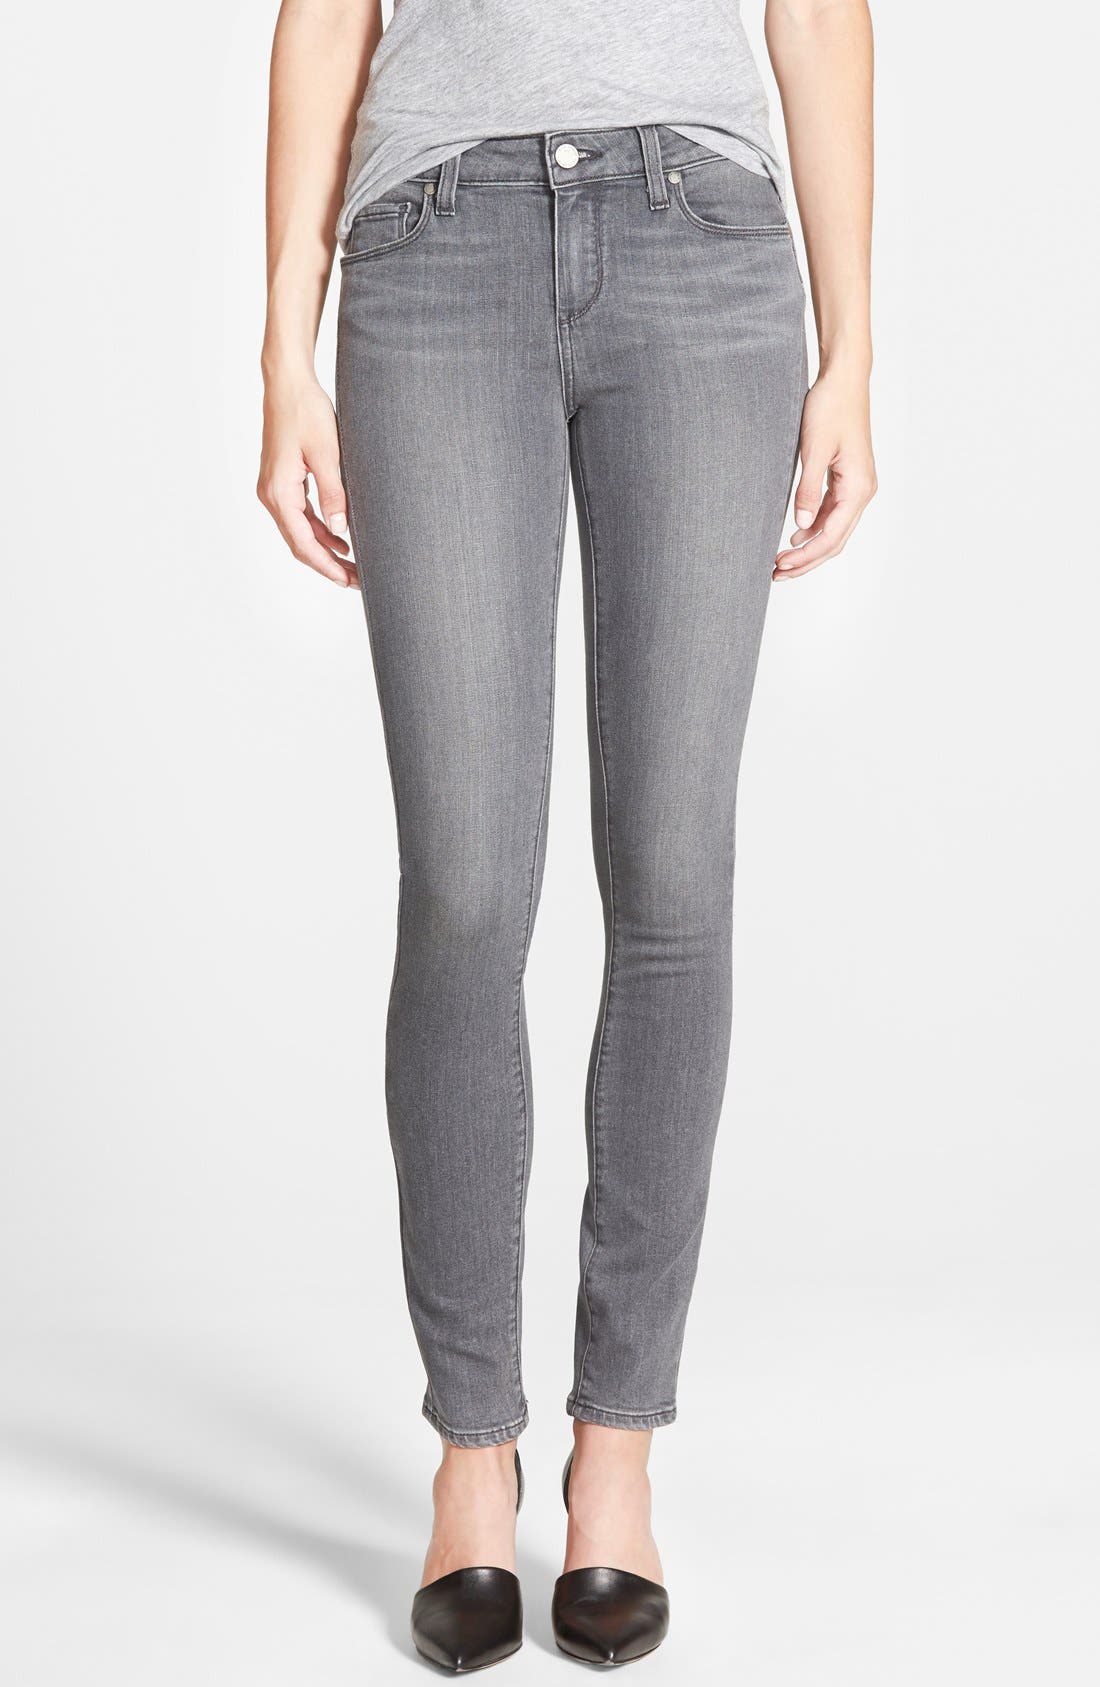 charcoal grey jeans womens